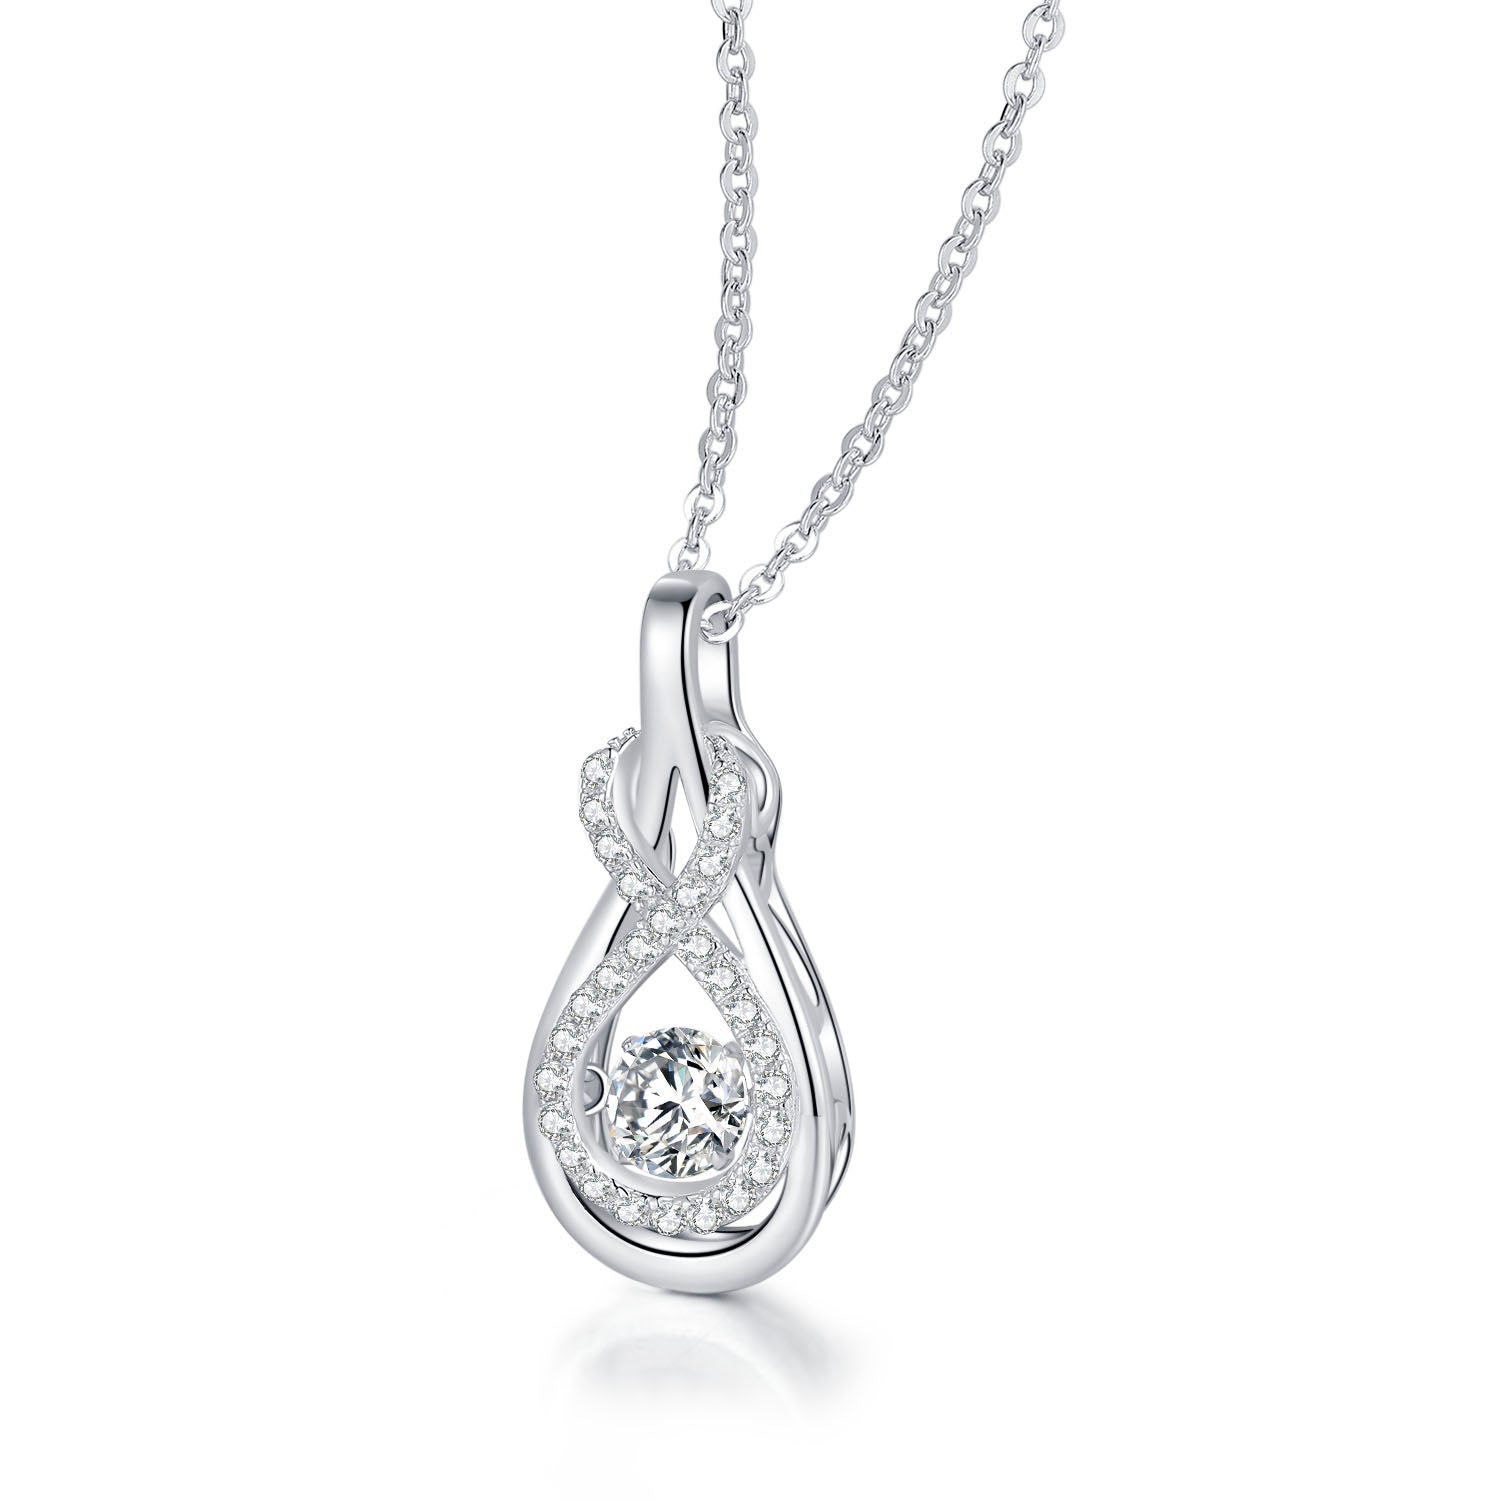 Fashion Smart 925 Sterling Silver Necklace